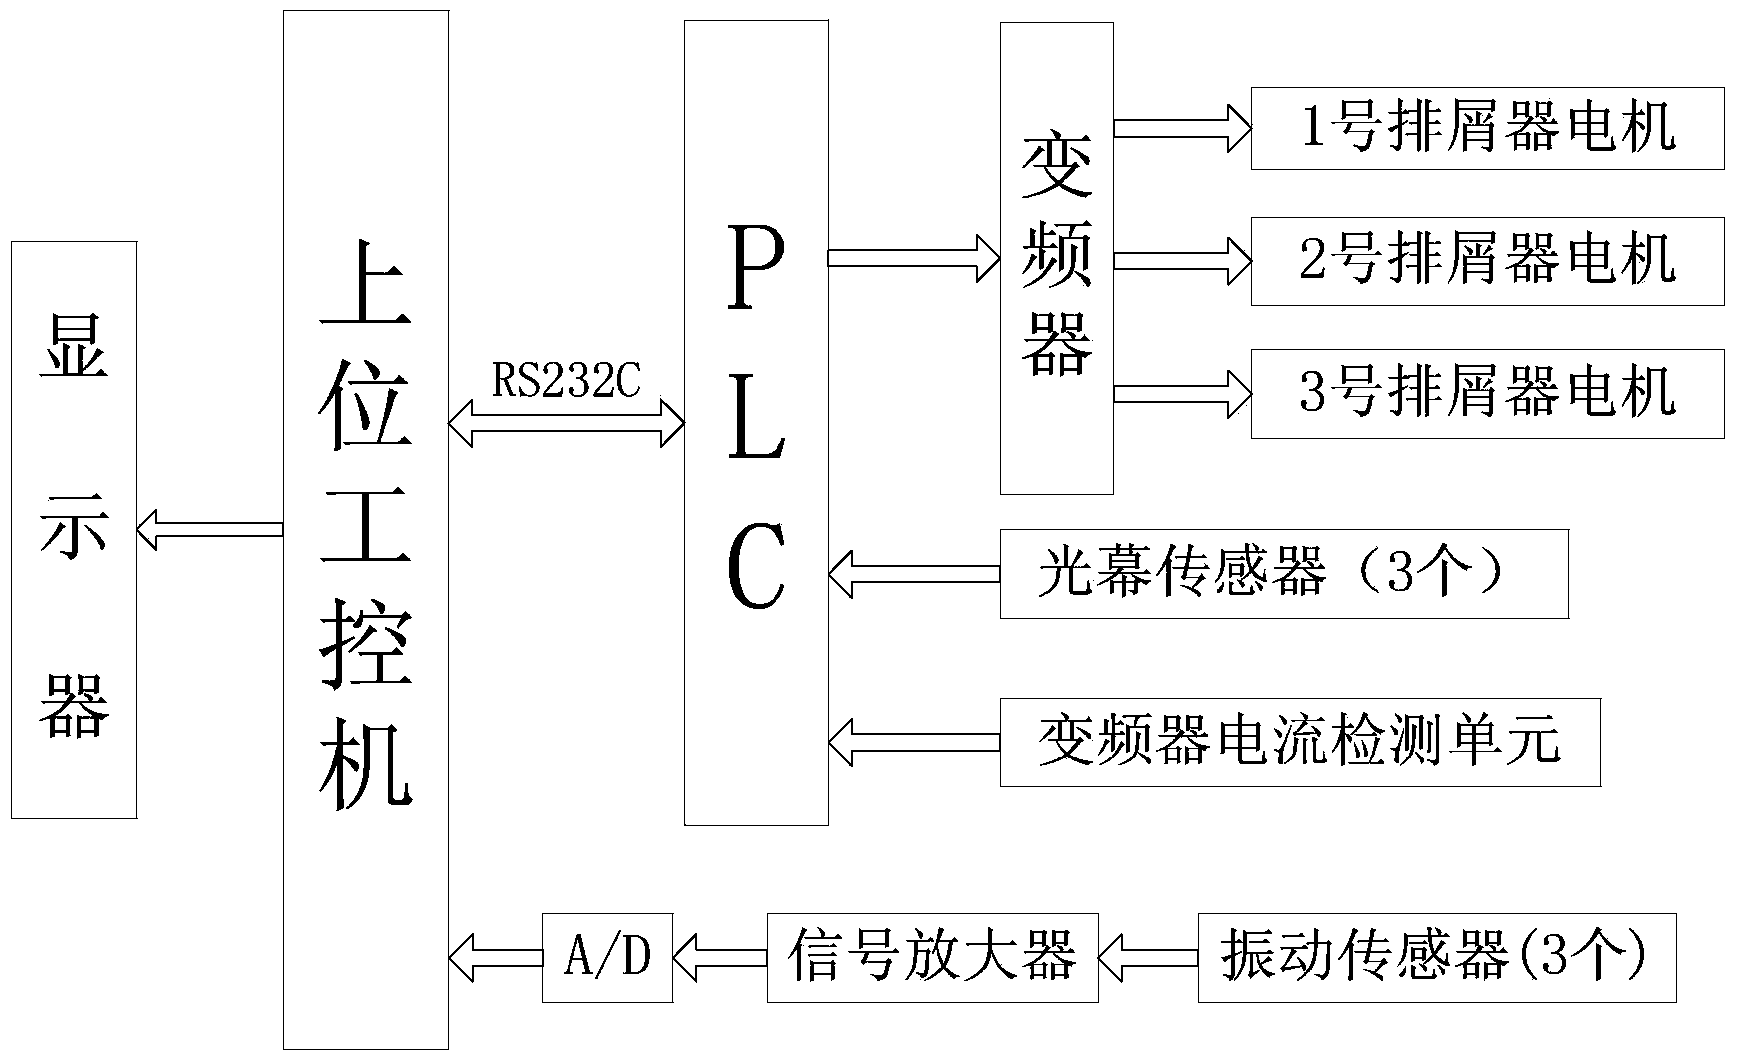 Reliability testing table for multistage tandem chip removing devices